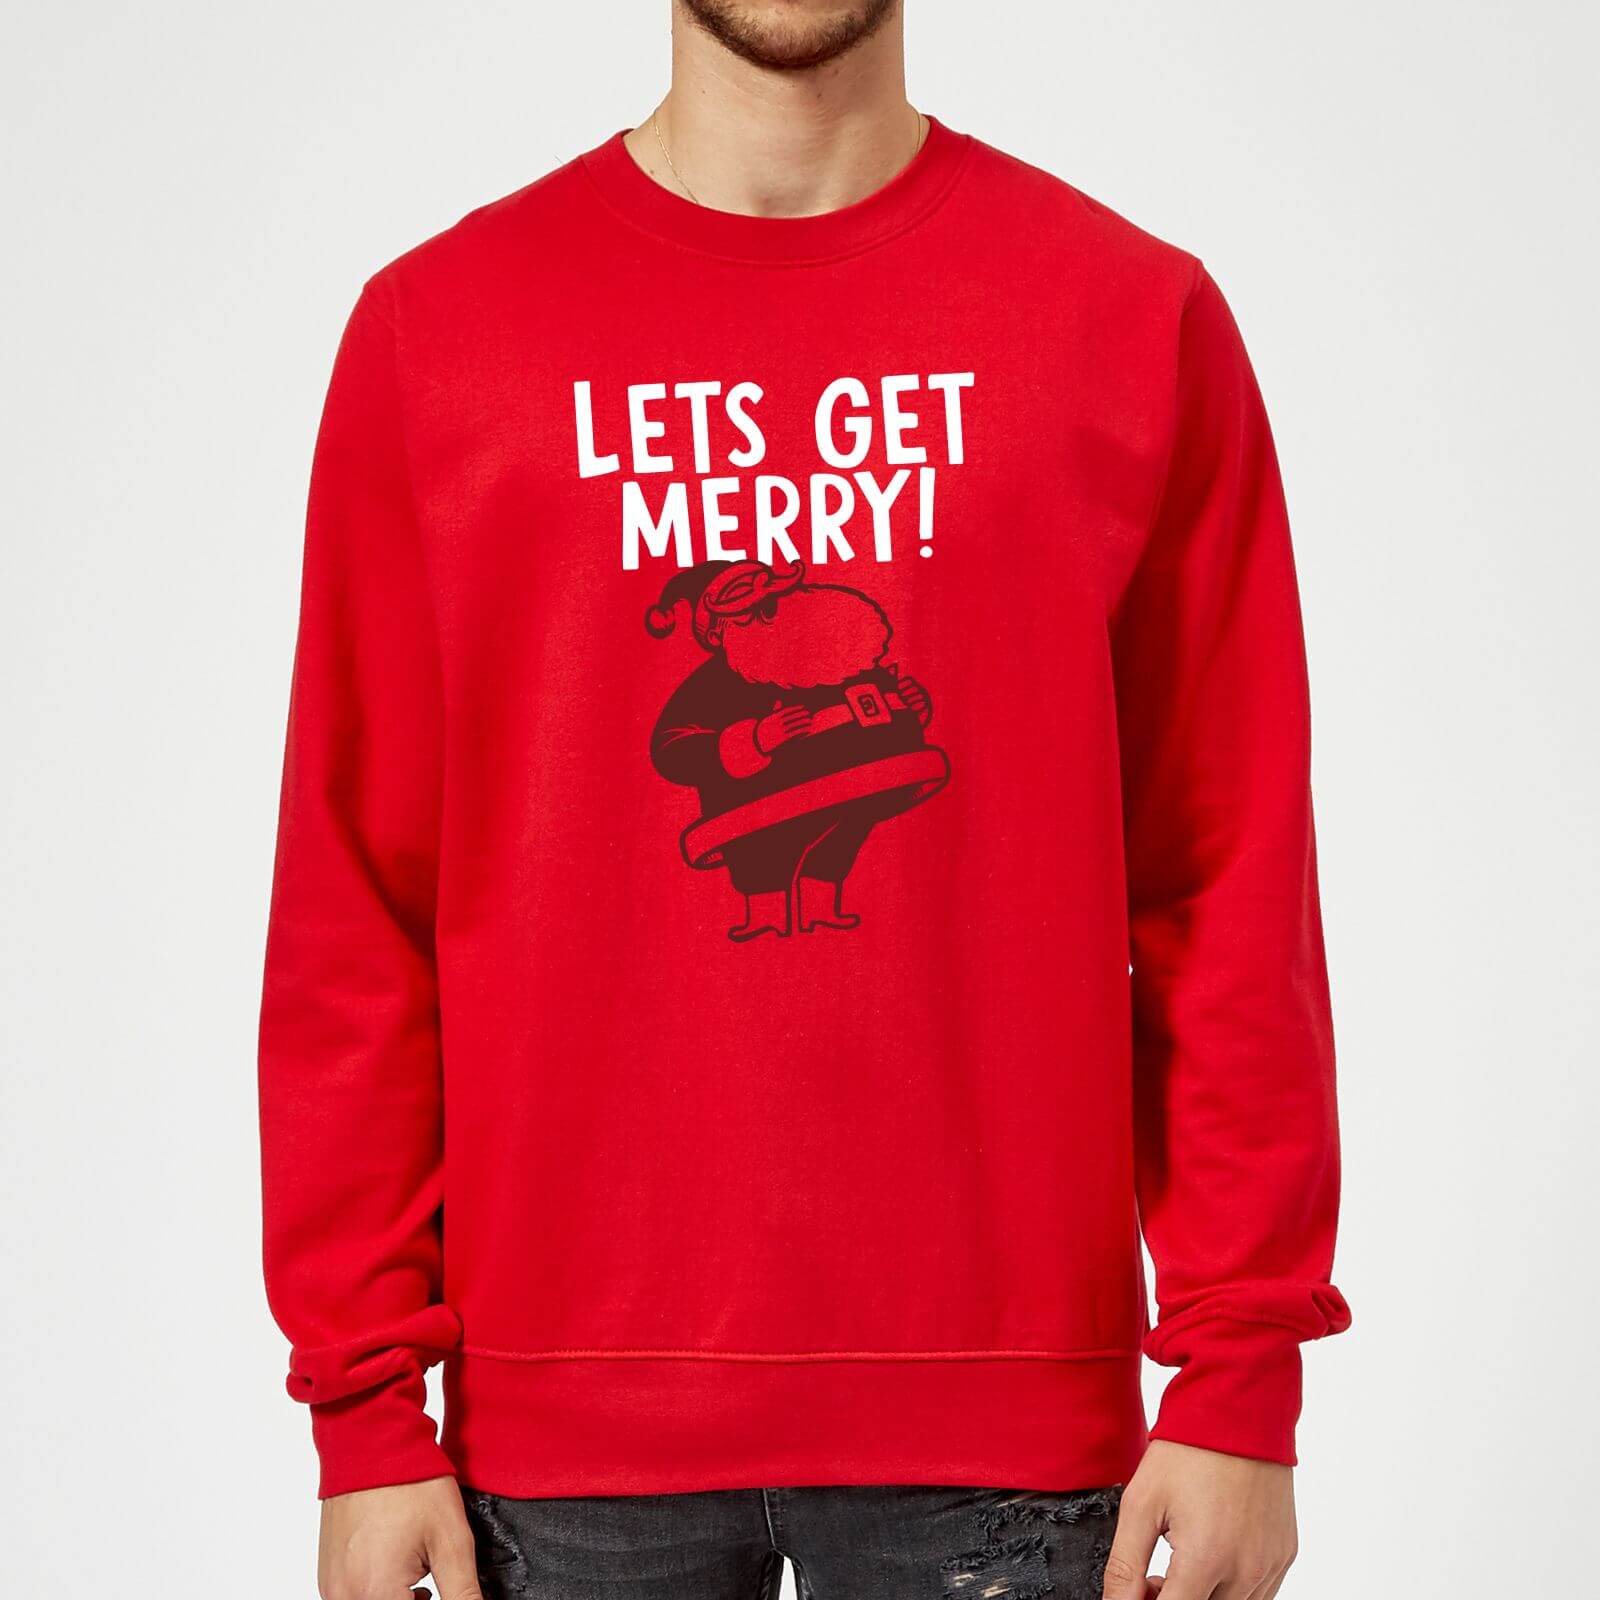 Lets Be Merry Sweatshirt - Red - M - Red